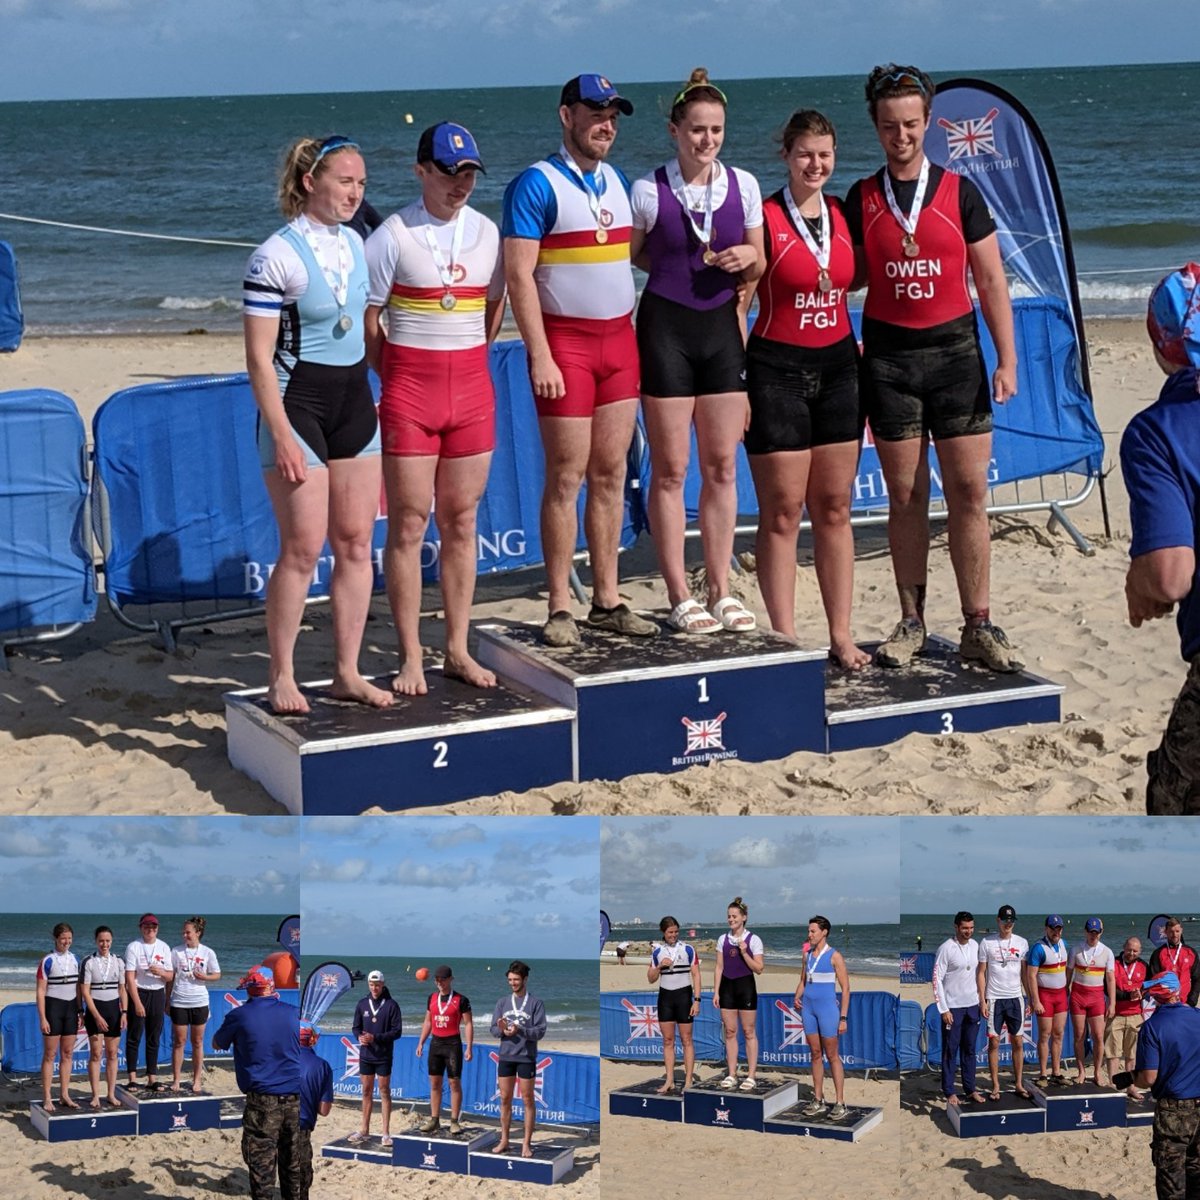 Well done to all the medalists today who raced in challenging conditions at the first ever @BritishRowing #beachsprints #BRBS19 . Thank you as well to all the volunteers who made it happen. Looking forward to seeing this event and many more like it grow in the future! 🌊🚣‍♀️🌊